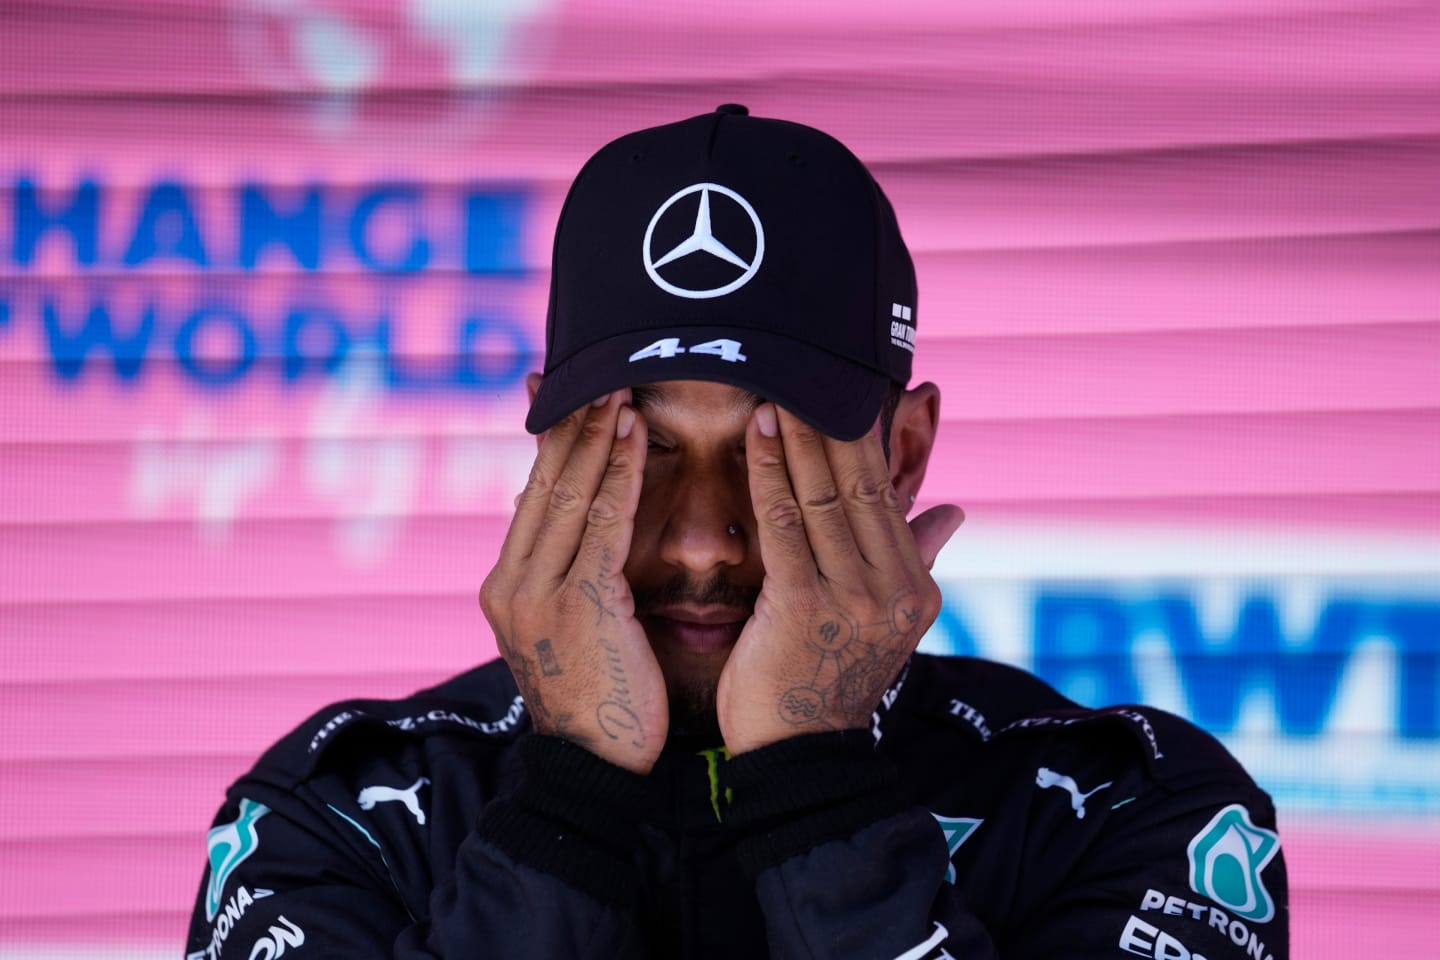 SPIELBERG, AUSTRIA - JUNE 26: Third place qualifier Lewis Hamilton of Great Britain and Mercedes GP wipes his face in parc ferme during qualifying ahead of the F1 Grand Prix of Styria at Red Bull Ring on June 26, 2021 in Spielberg, Austria. (Photo by Darko Vojinovic - Pool/Getty Images)